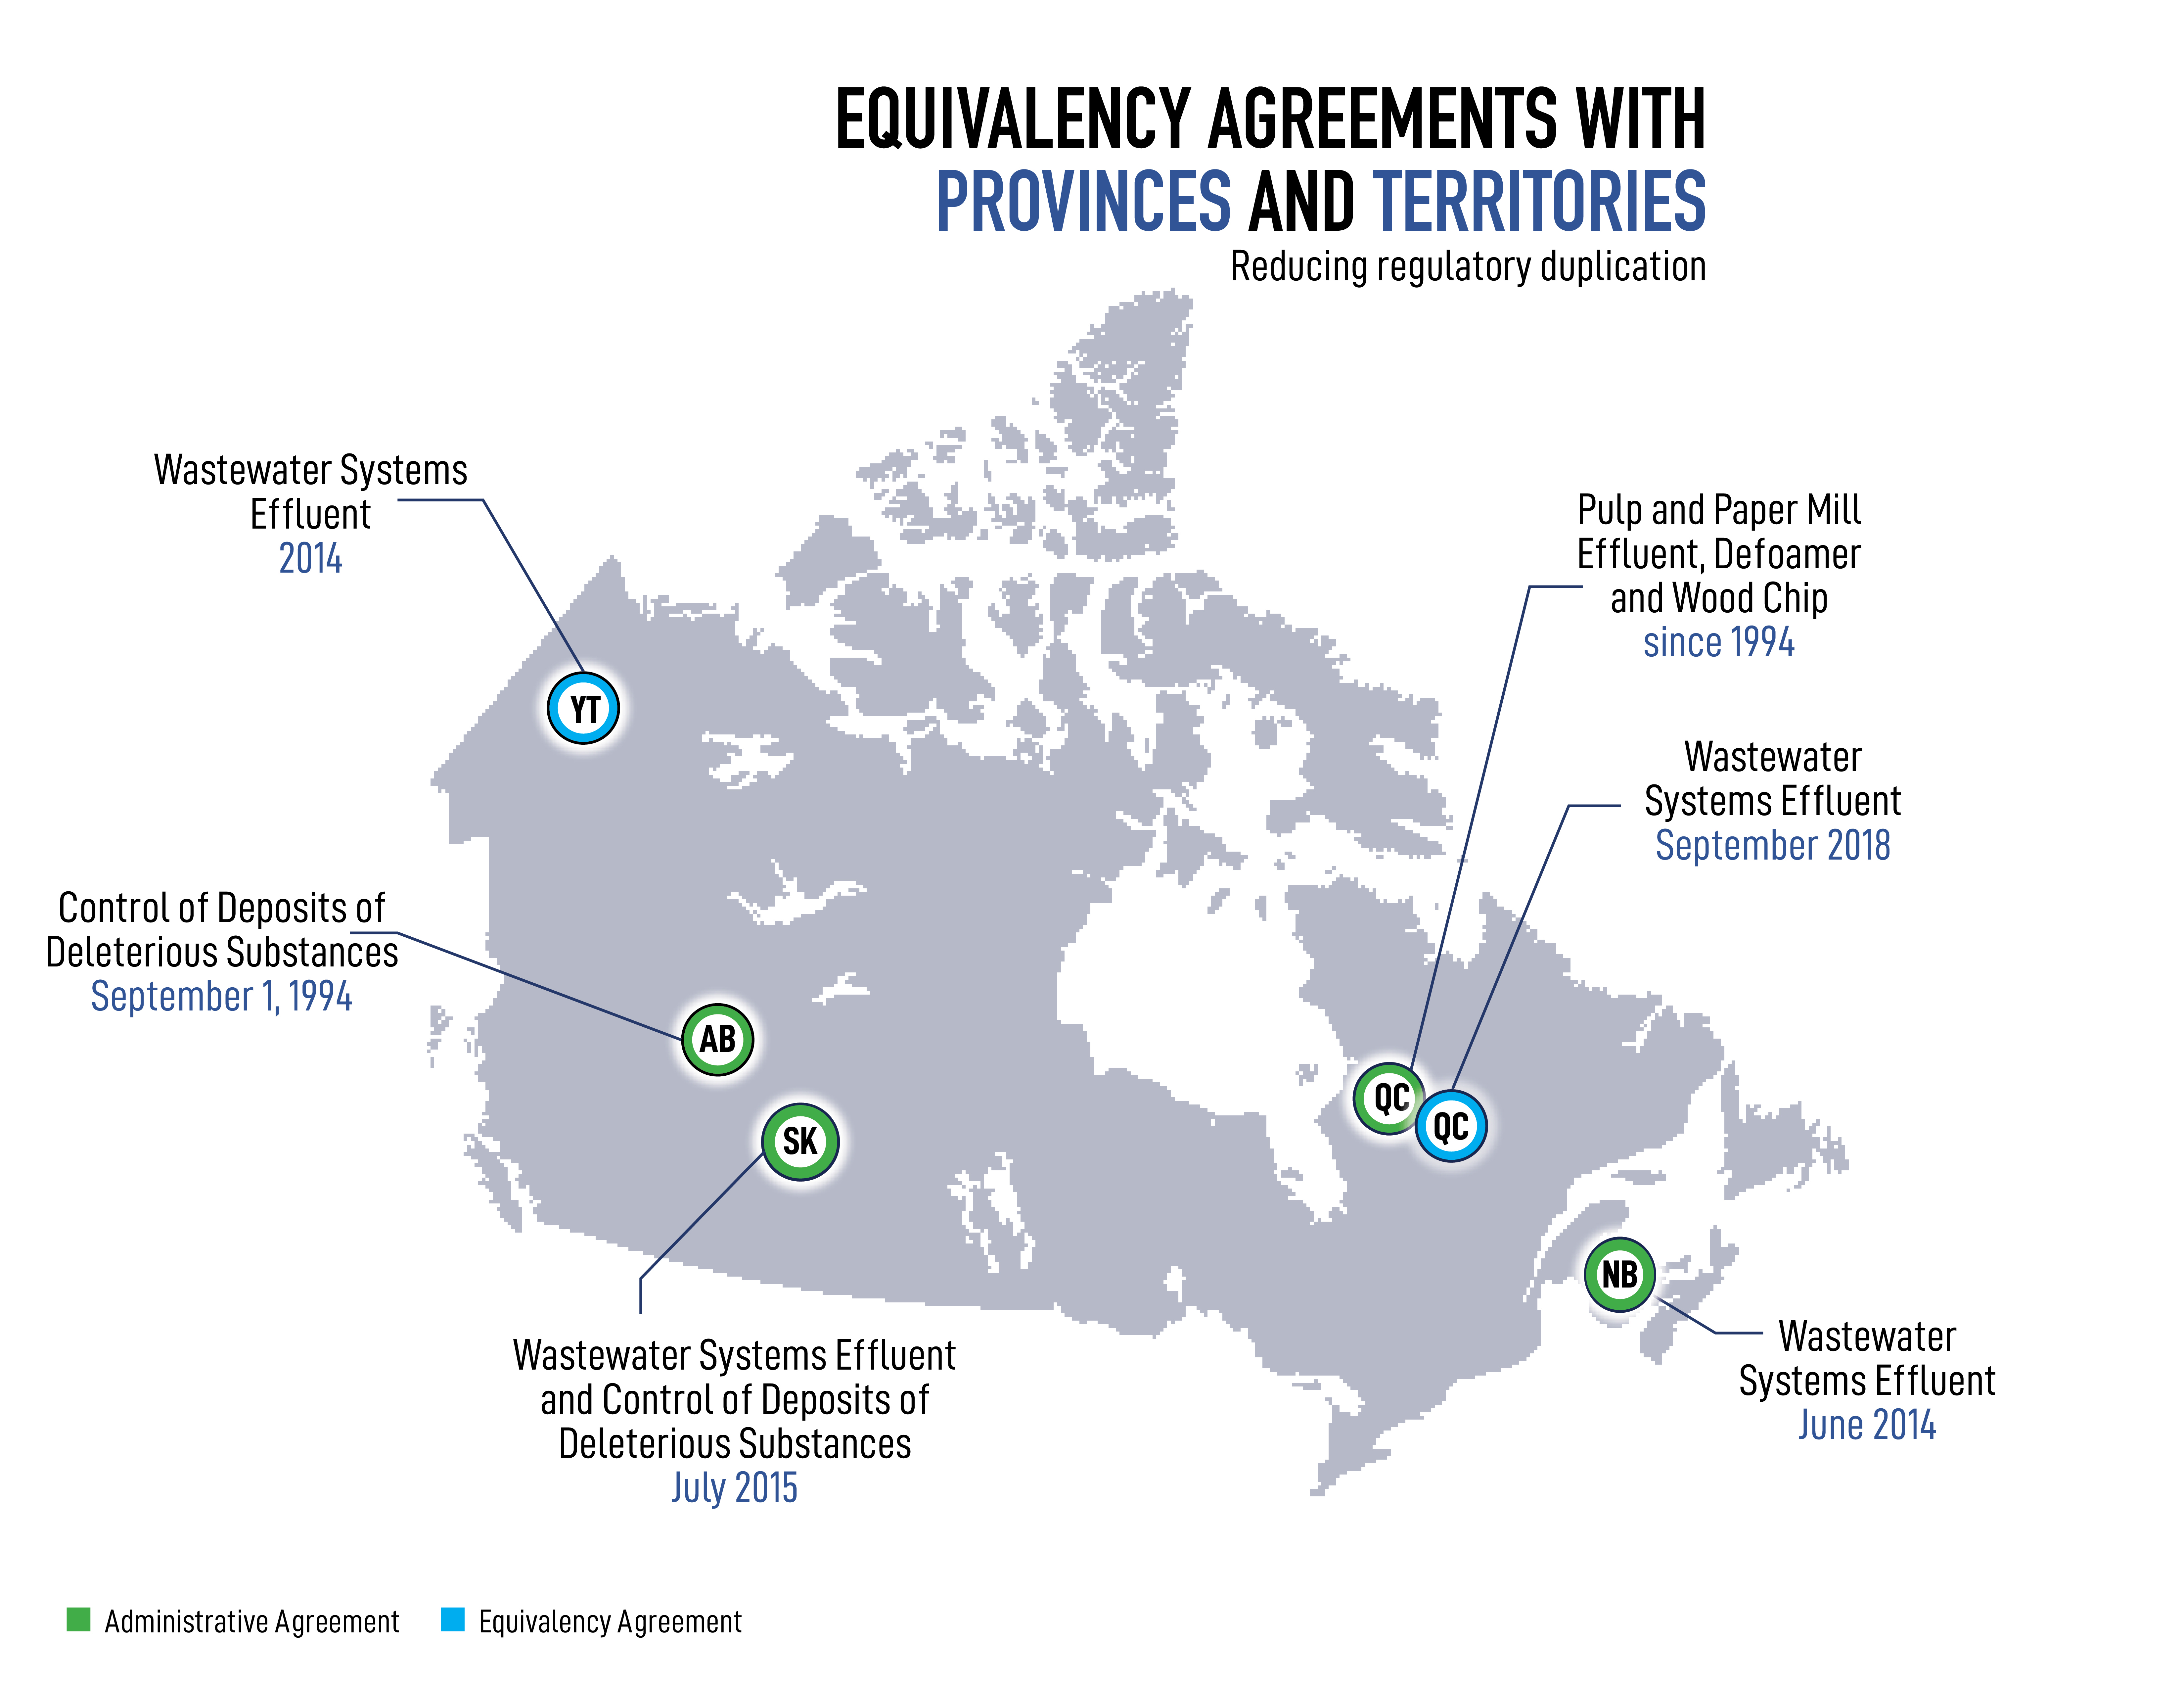 Infographic showing equivalency and administrative agreements across a map of Canada, as described in section 3.3.